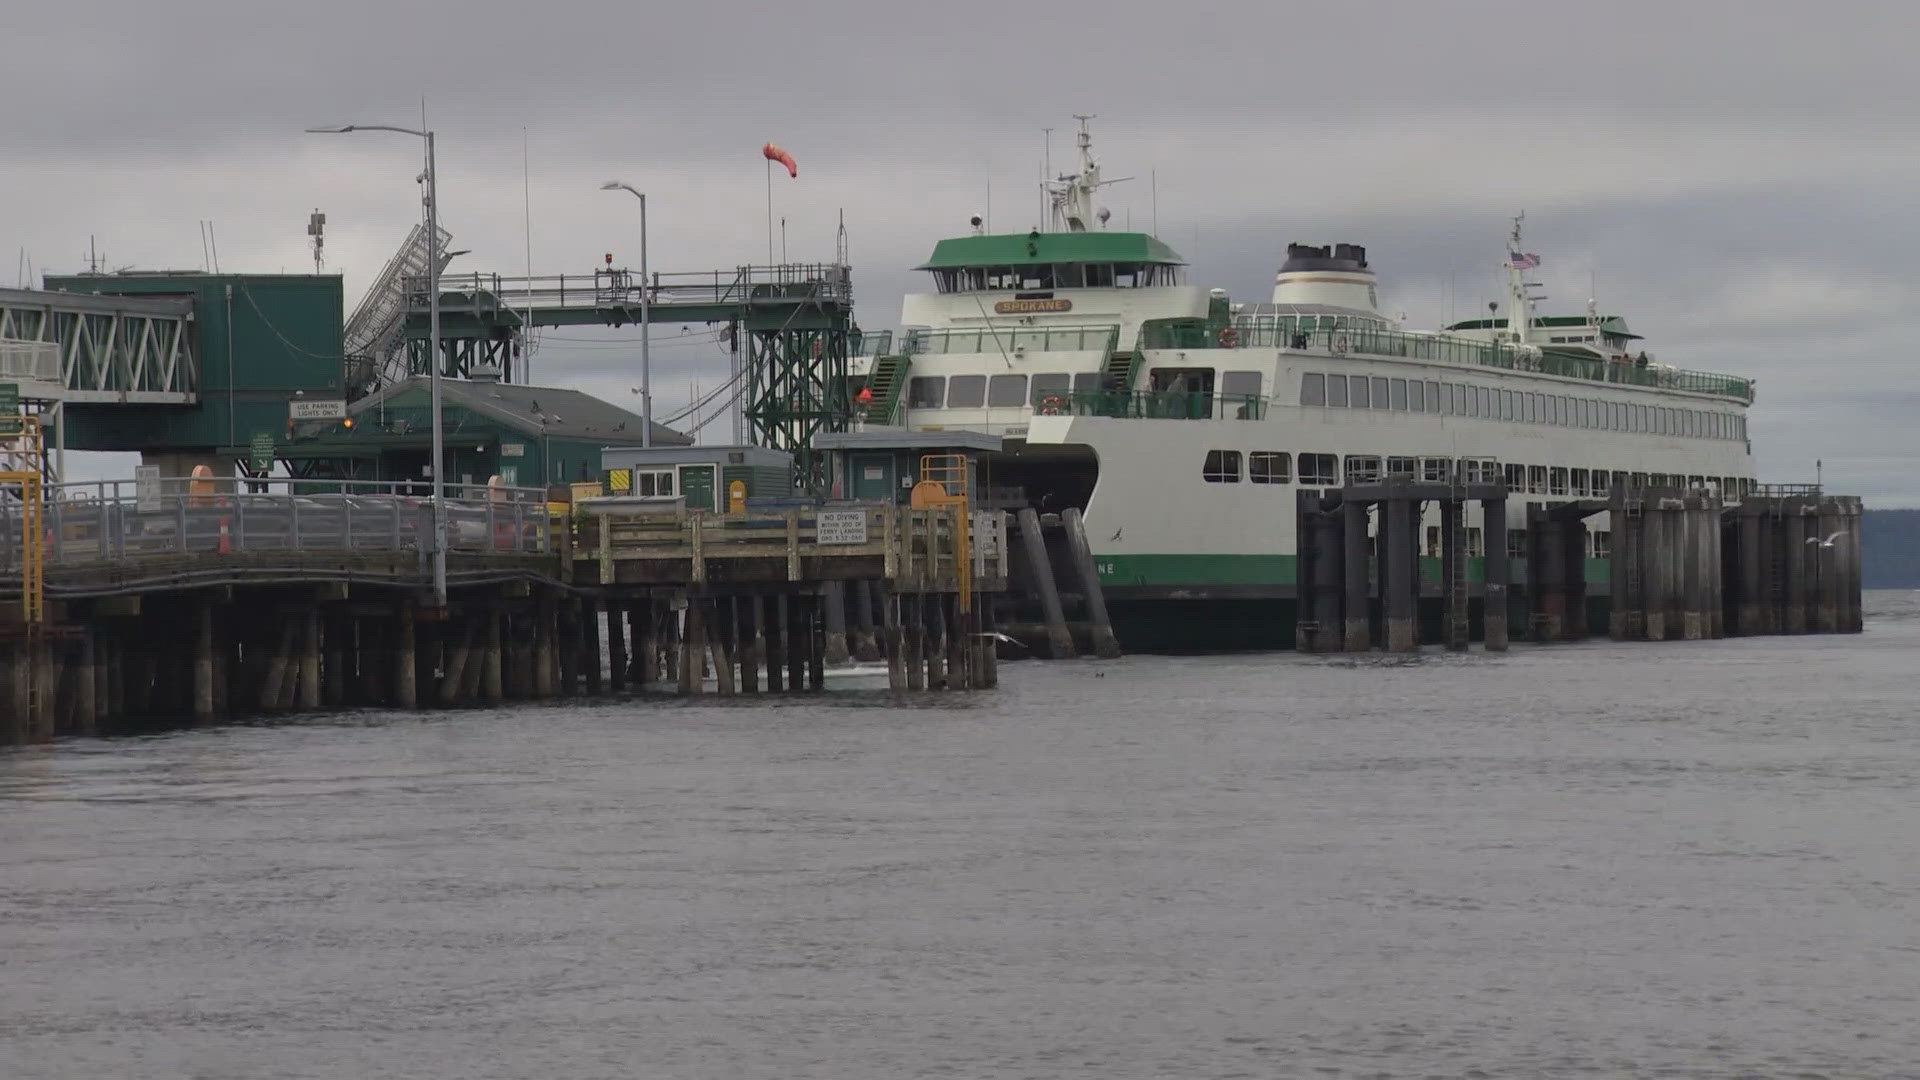 ​Washington state has 21 boats in its fleet, but right now, only 14 are in service.